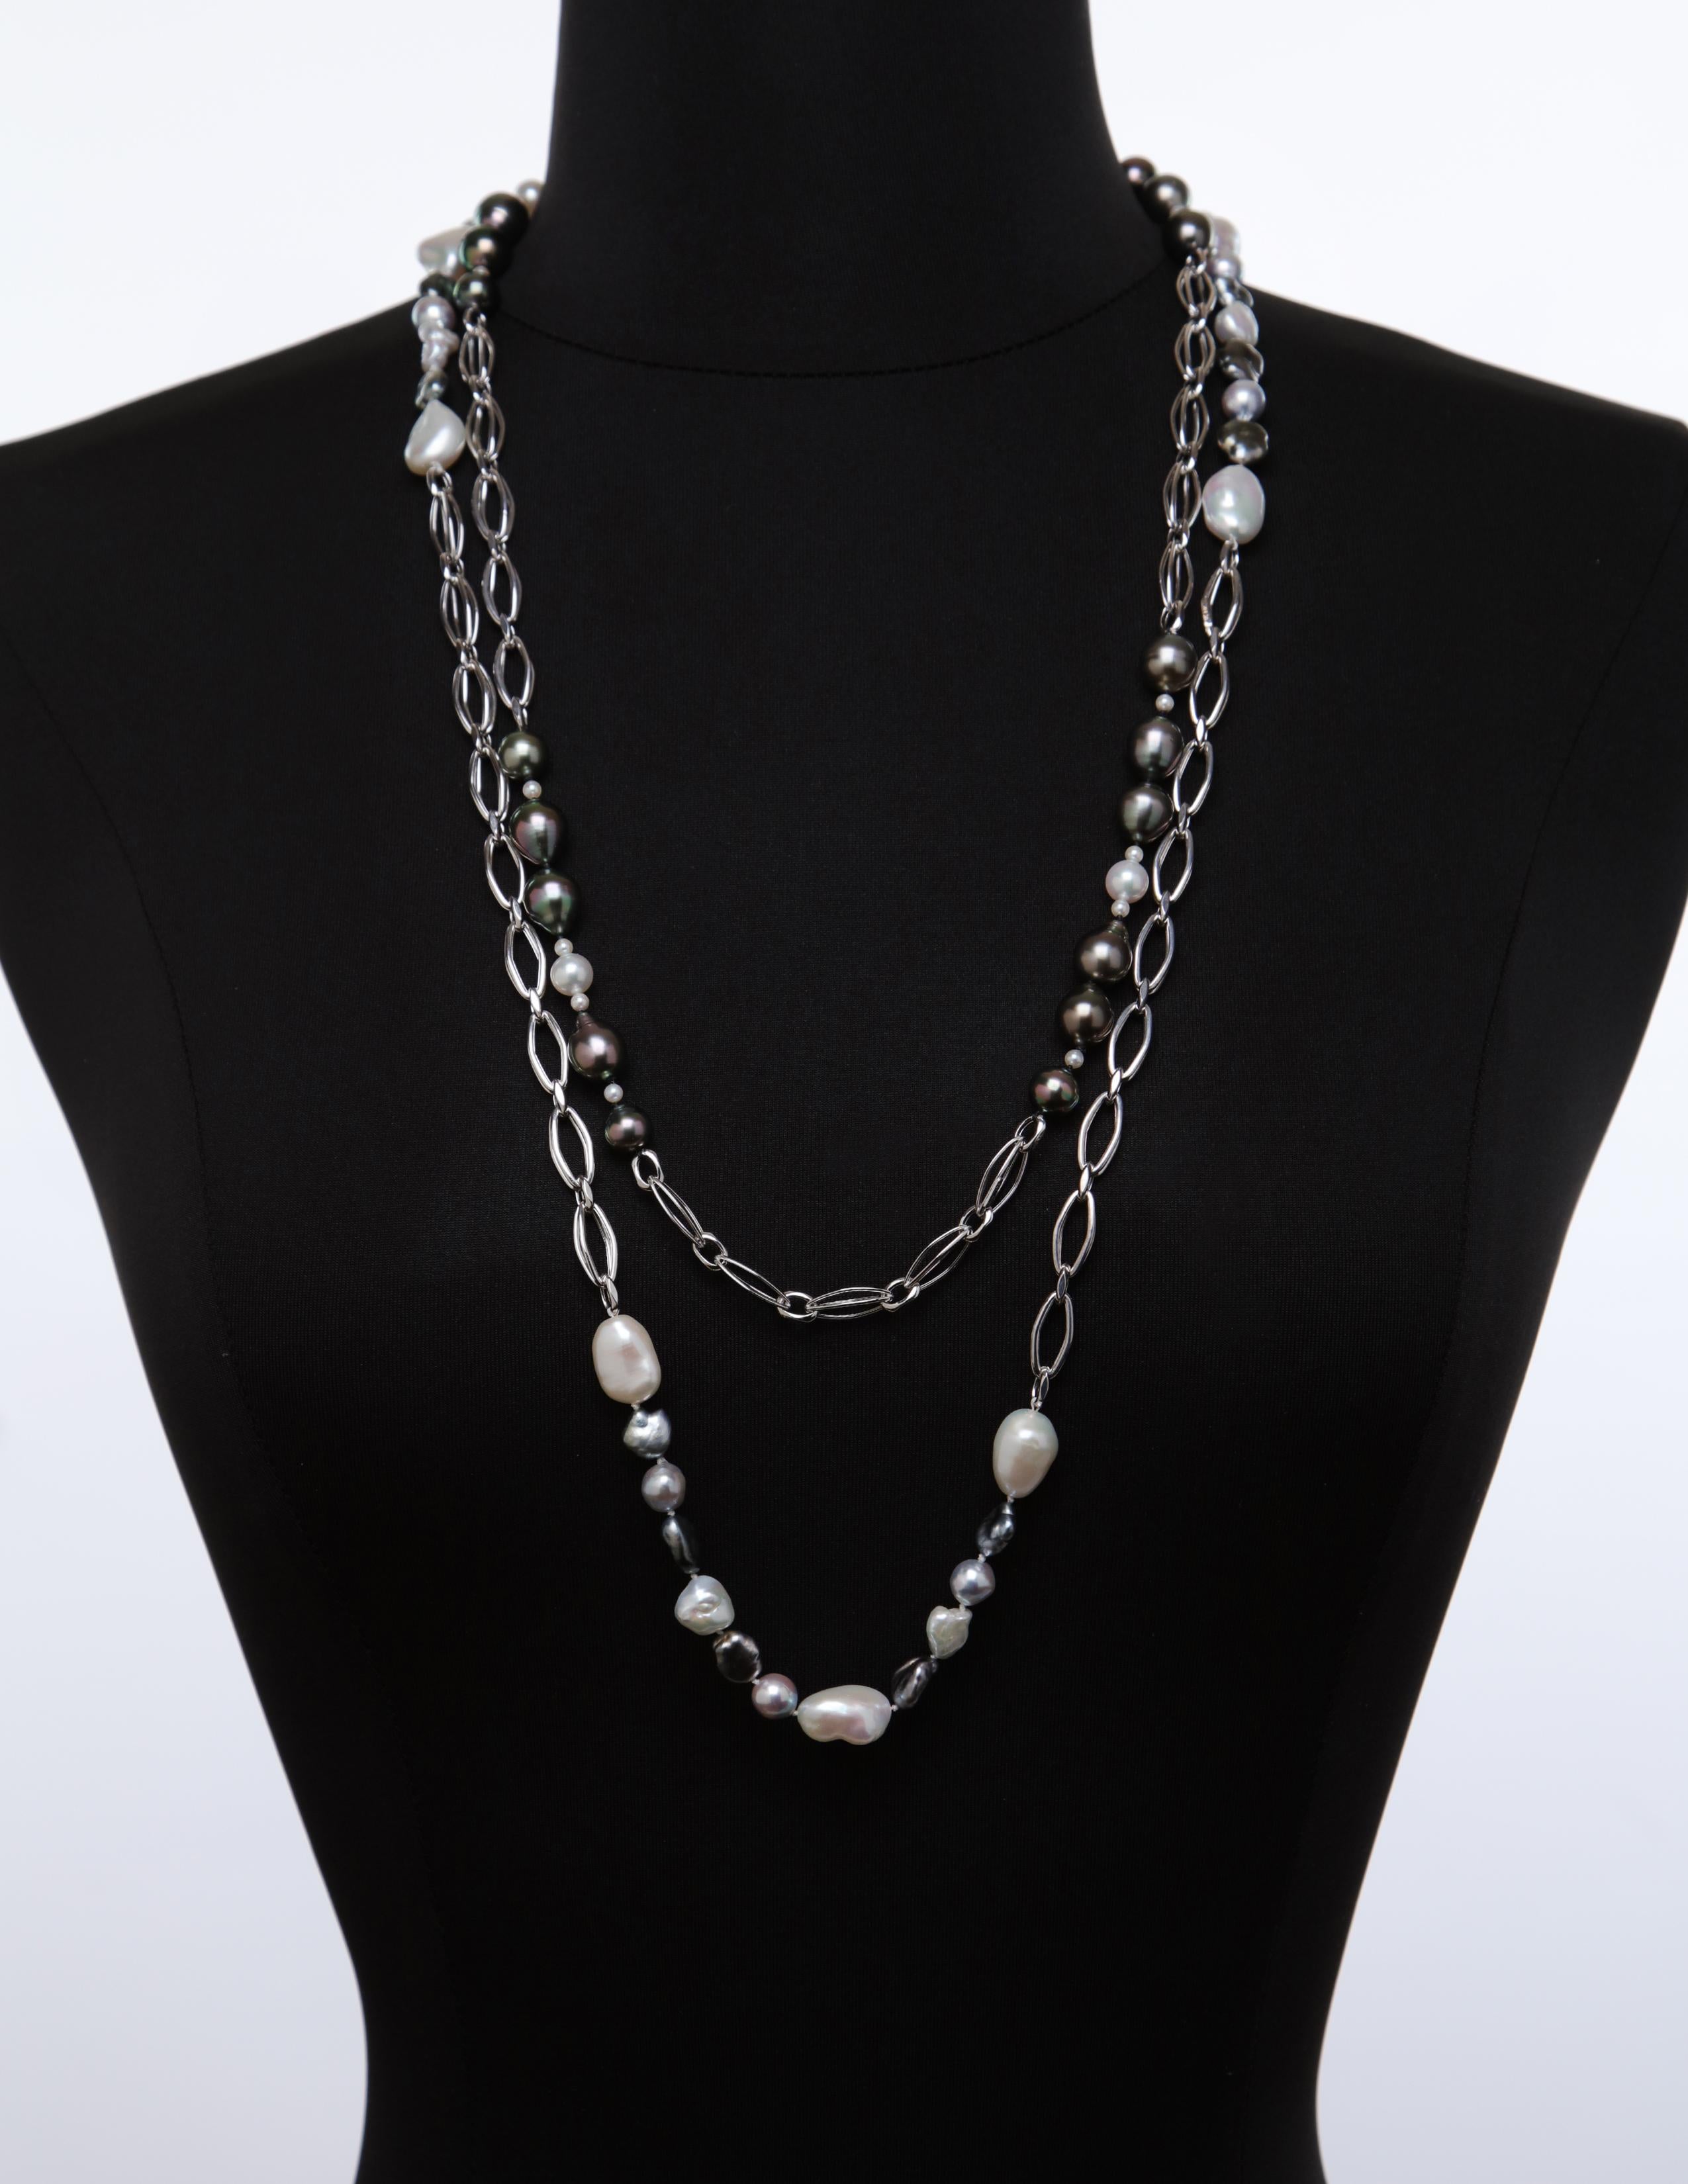 Akoya, Keshi, and South Sea Pearls on a White Gold Chain In New Condition For Sale In Athens, GA